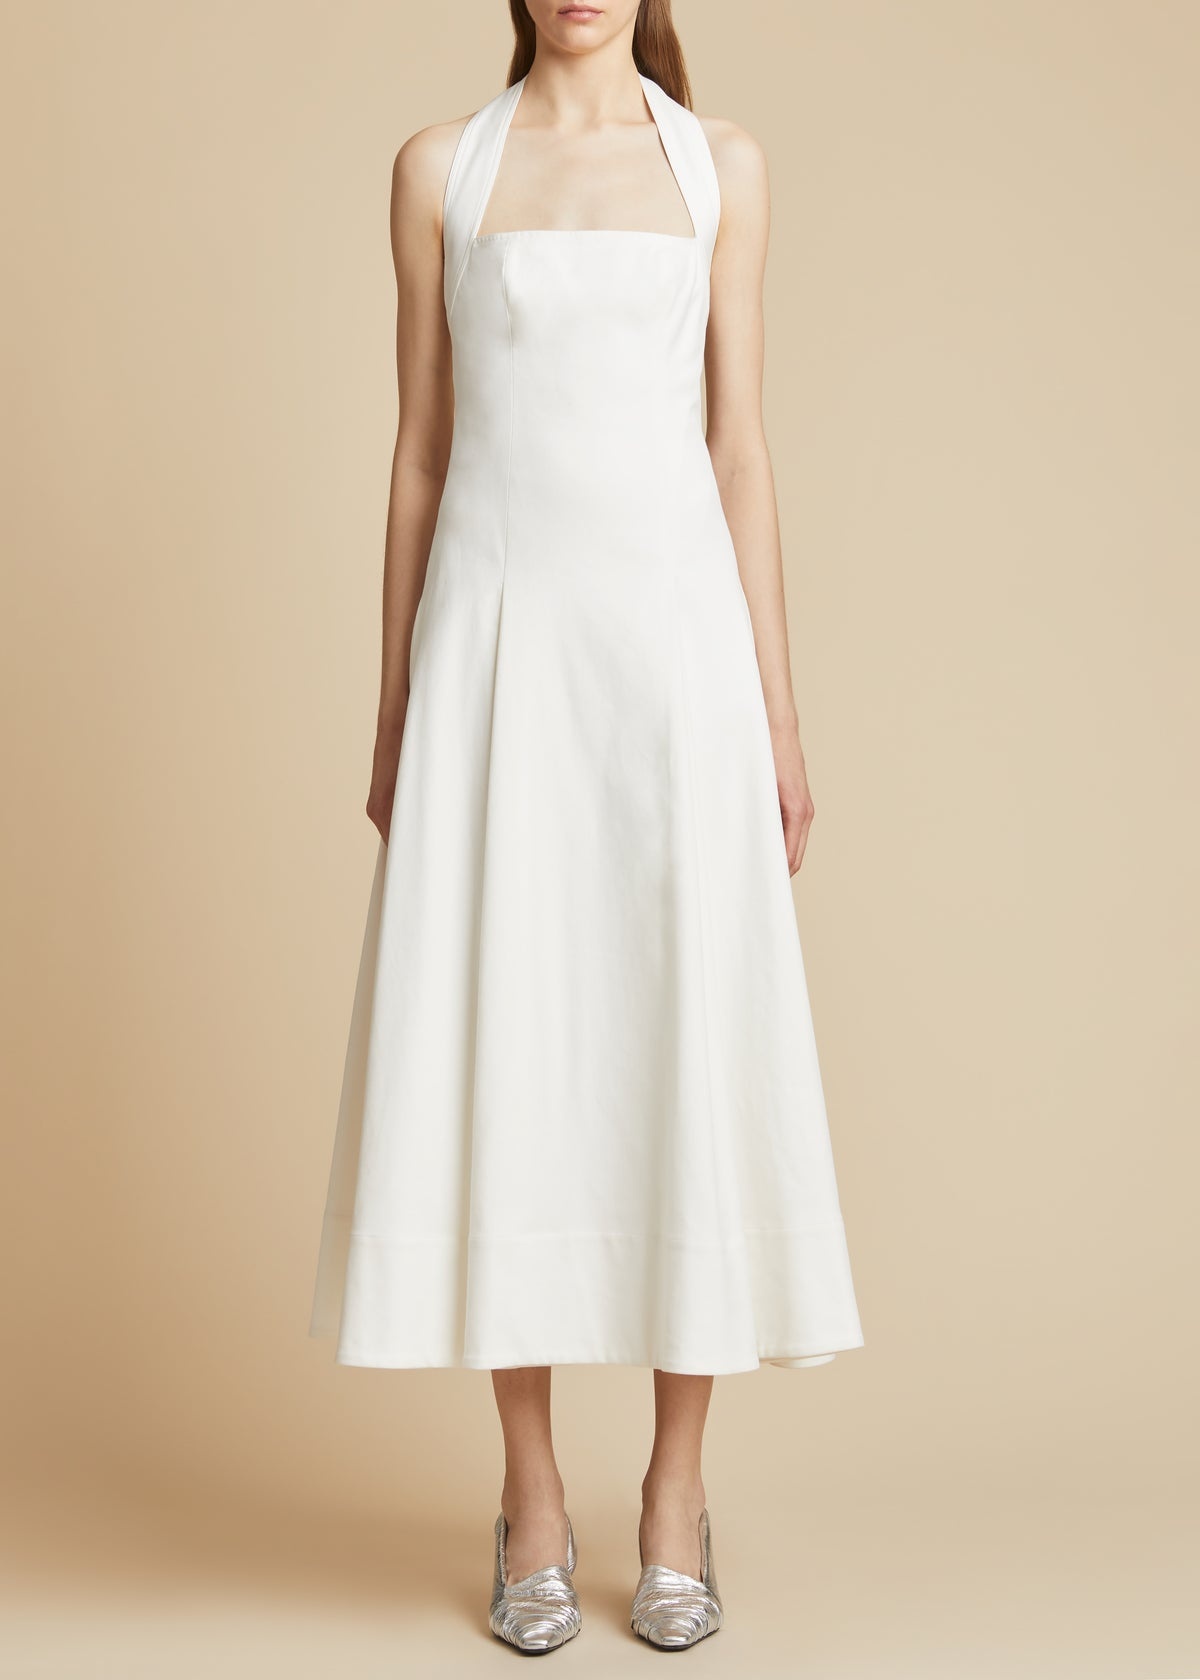 The Lalita Dress in White - 2